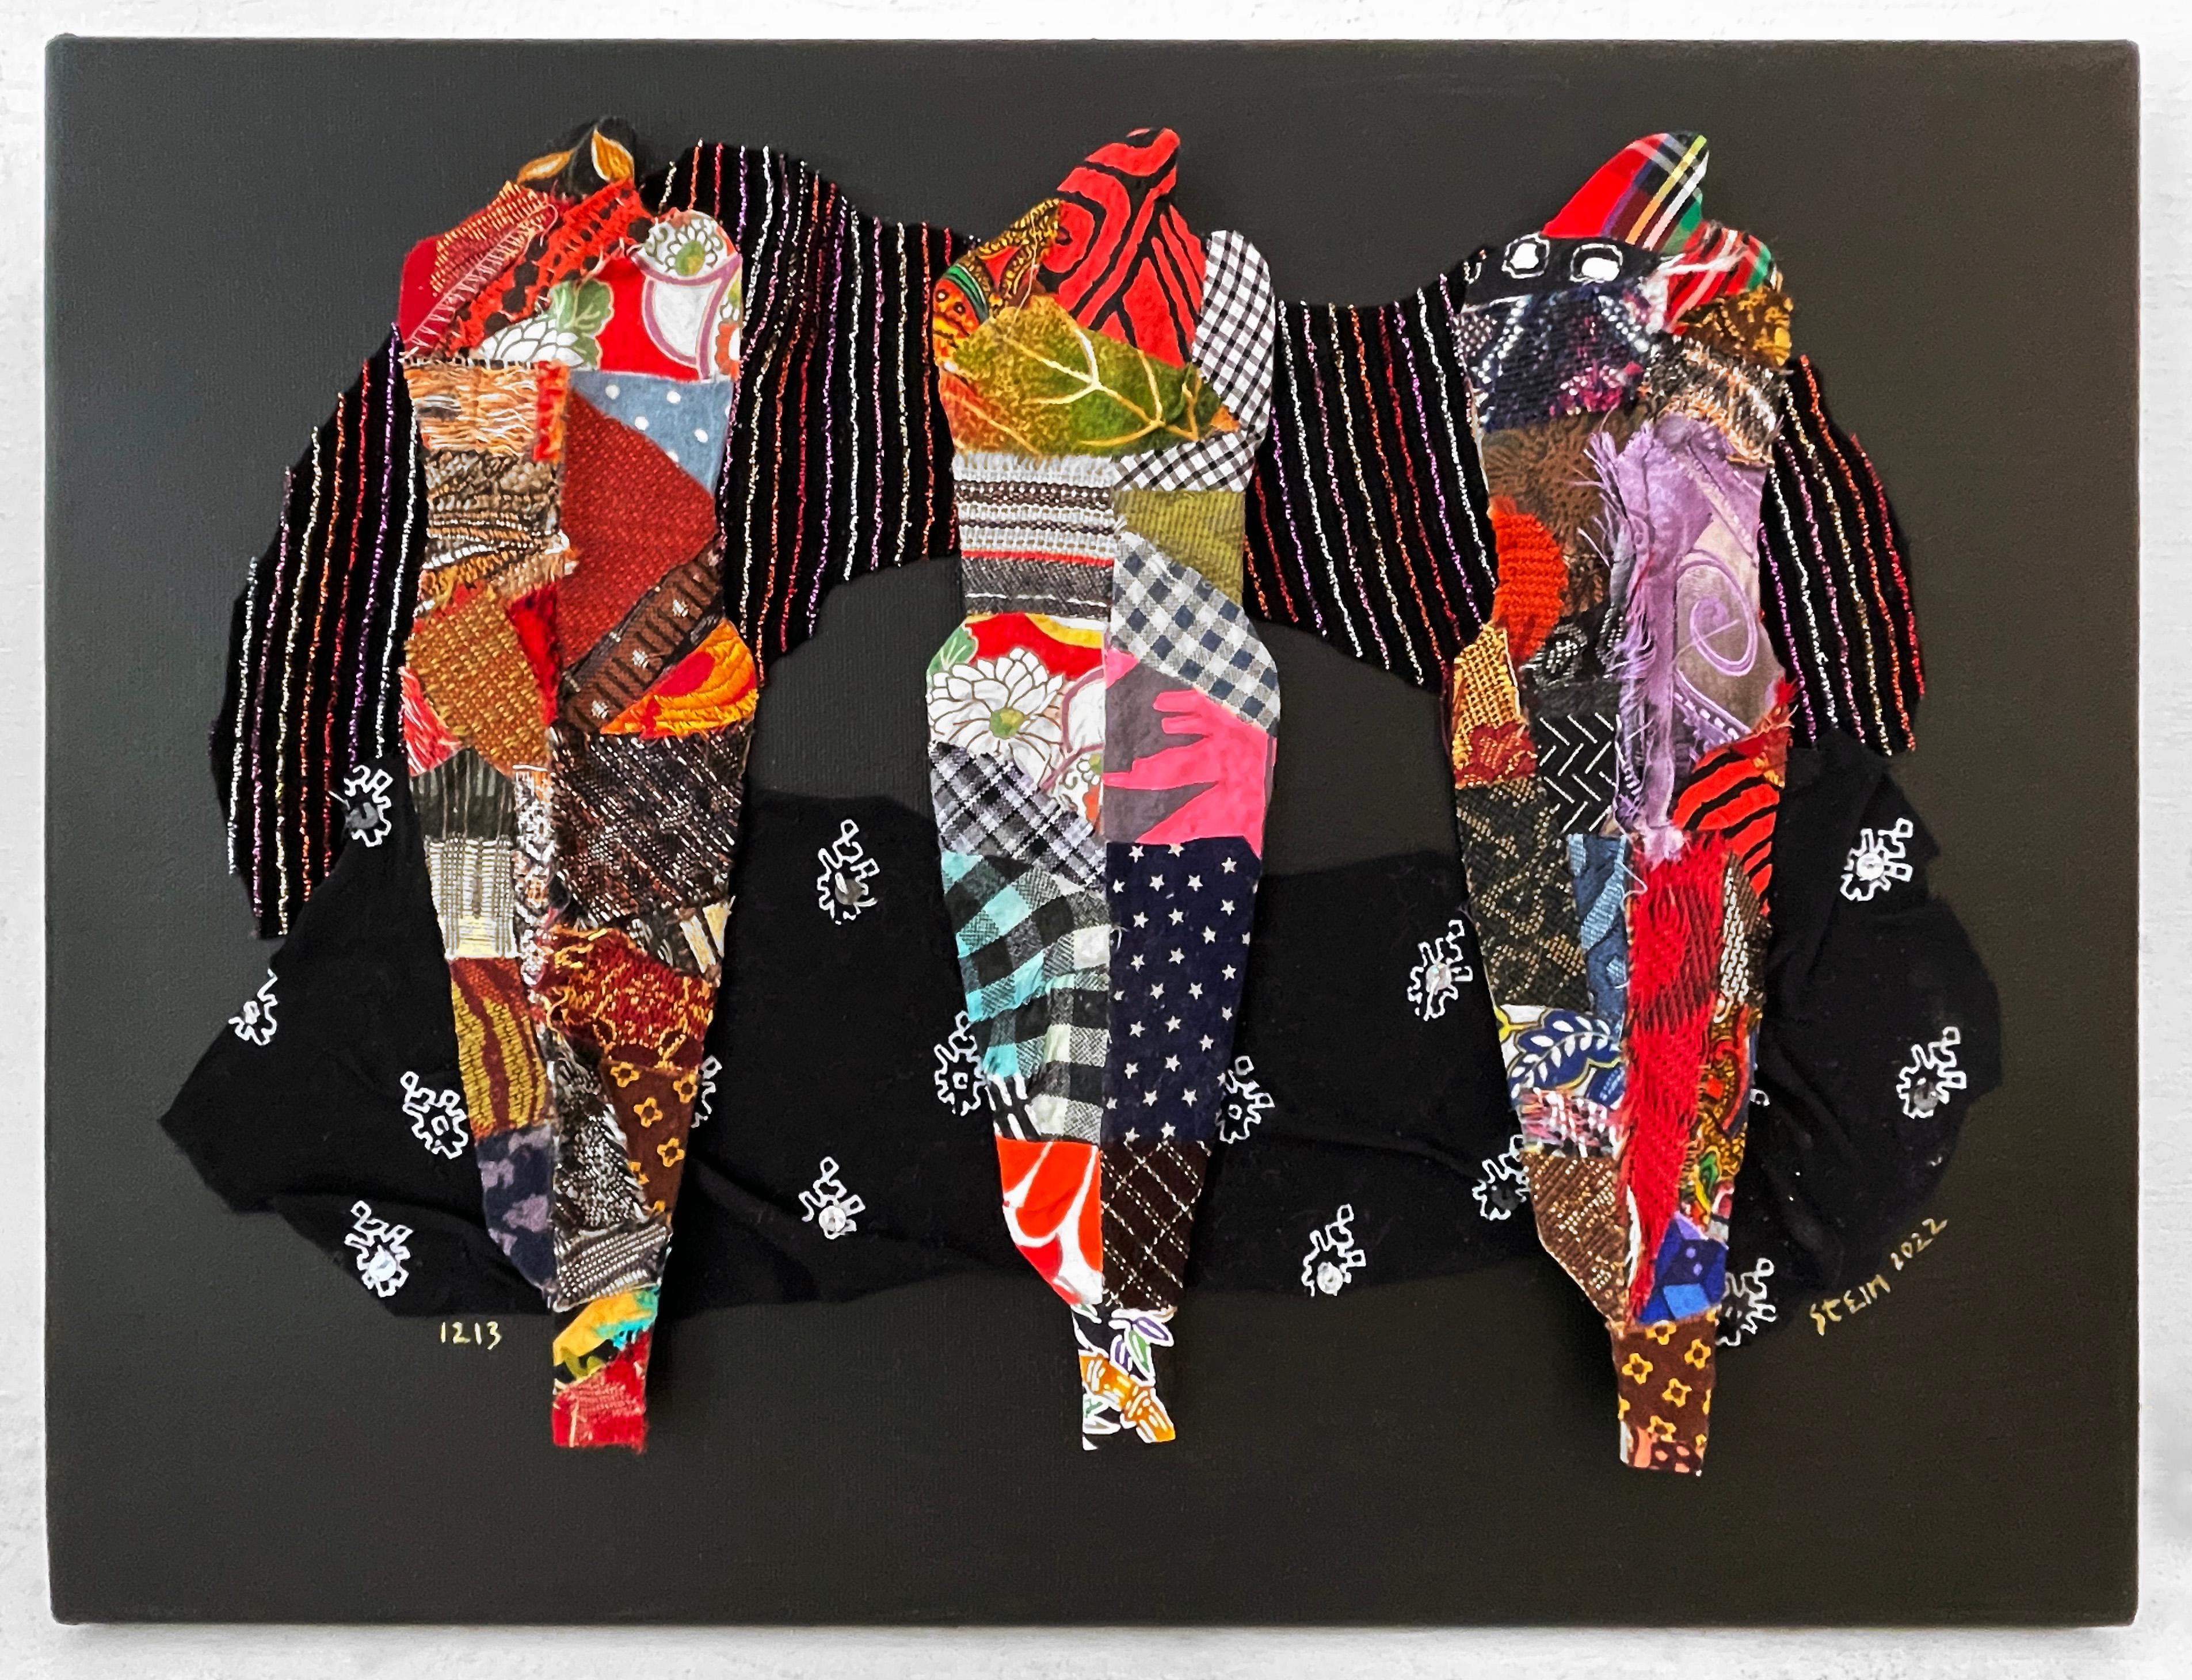 Linda Stein, 1213 - Contemporary Art 3D Mixed Media Fabric Sculptural Collage

Linda Stein started her Knights of Protection series after she was forced to evacuate her New York downtown studio for a year post-9/11.  Stein's Knights are shield-like